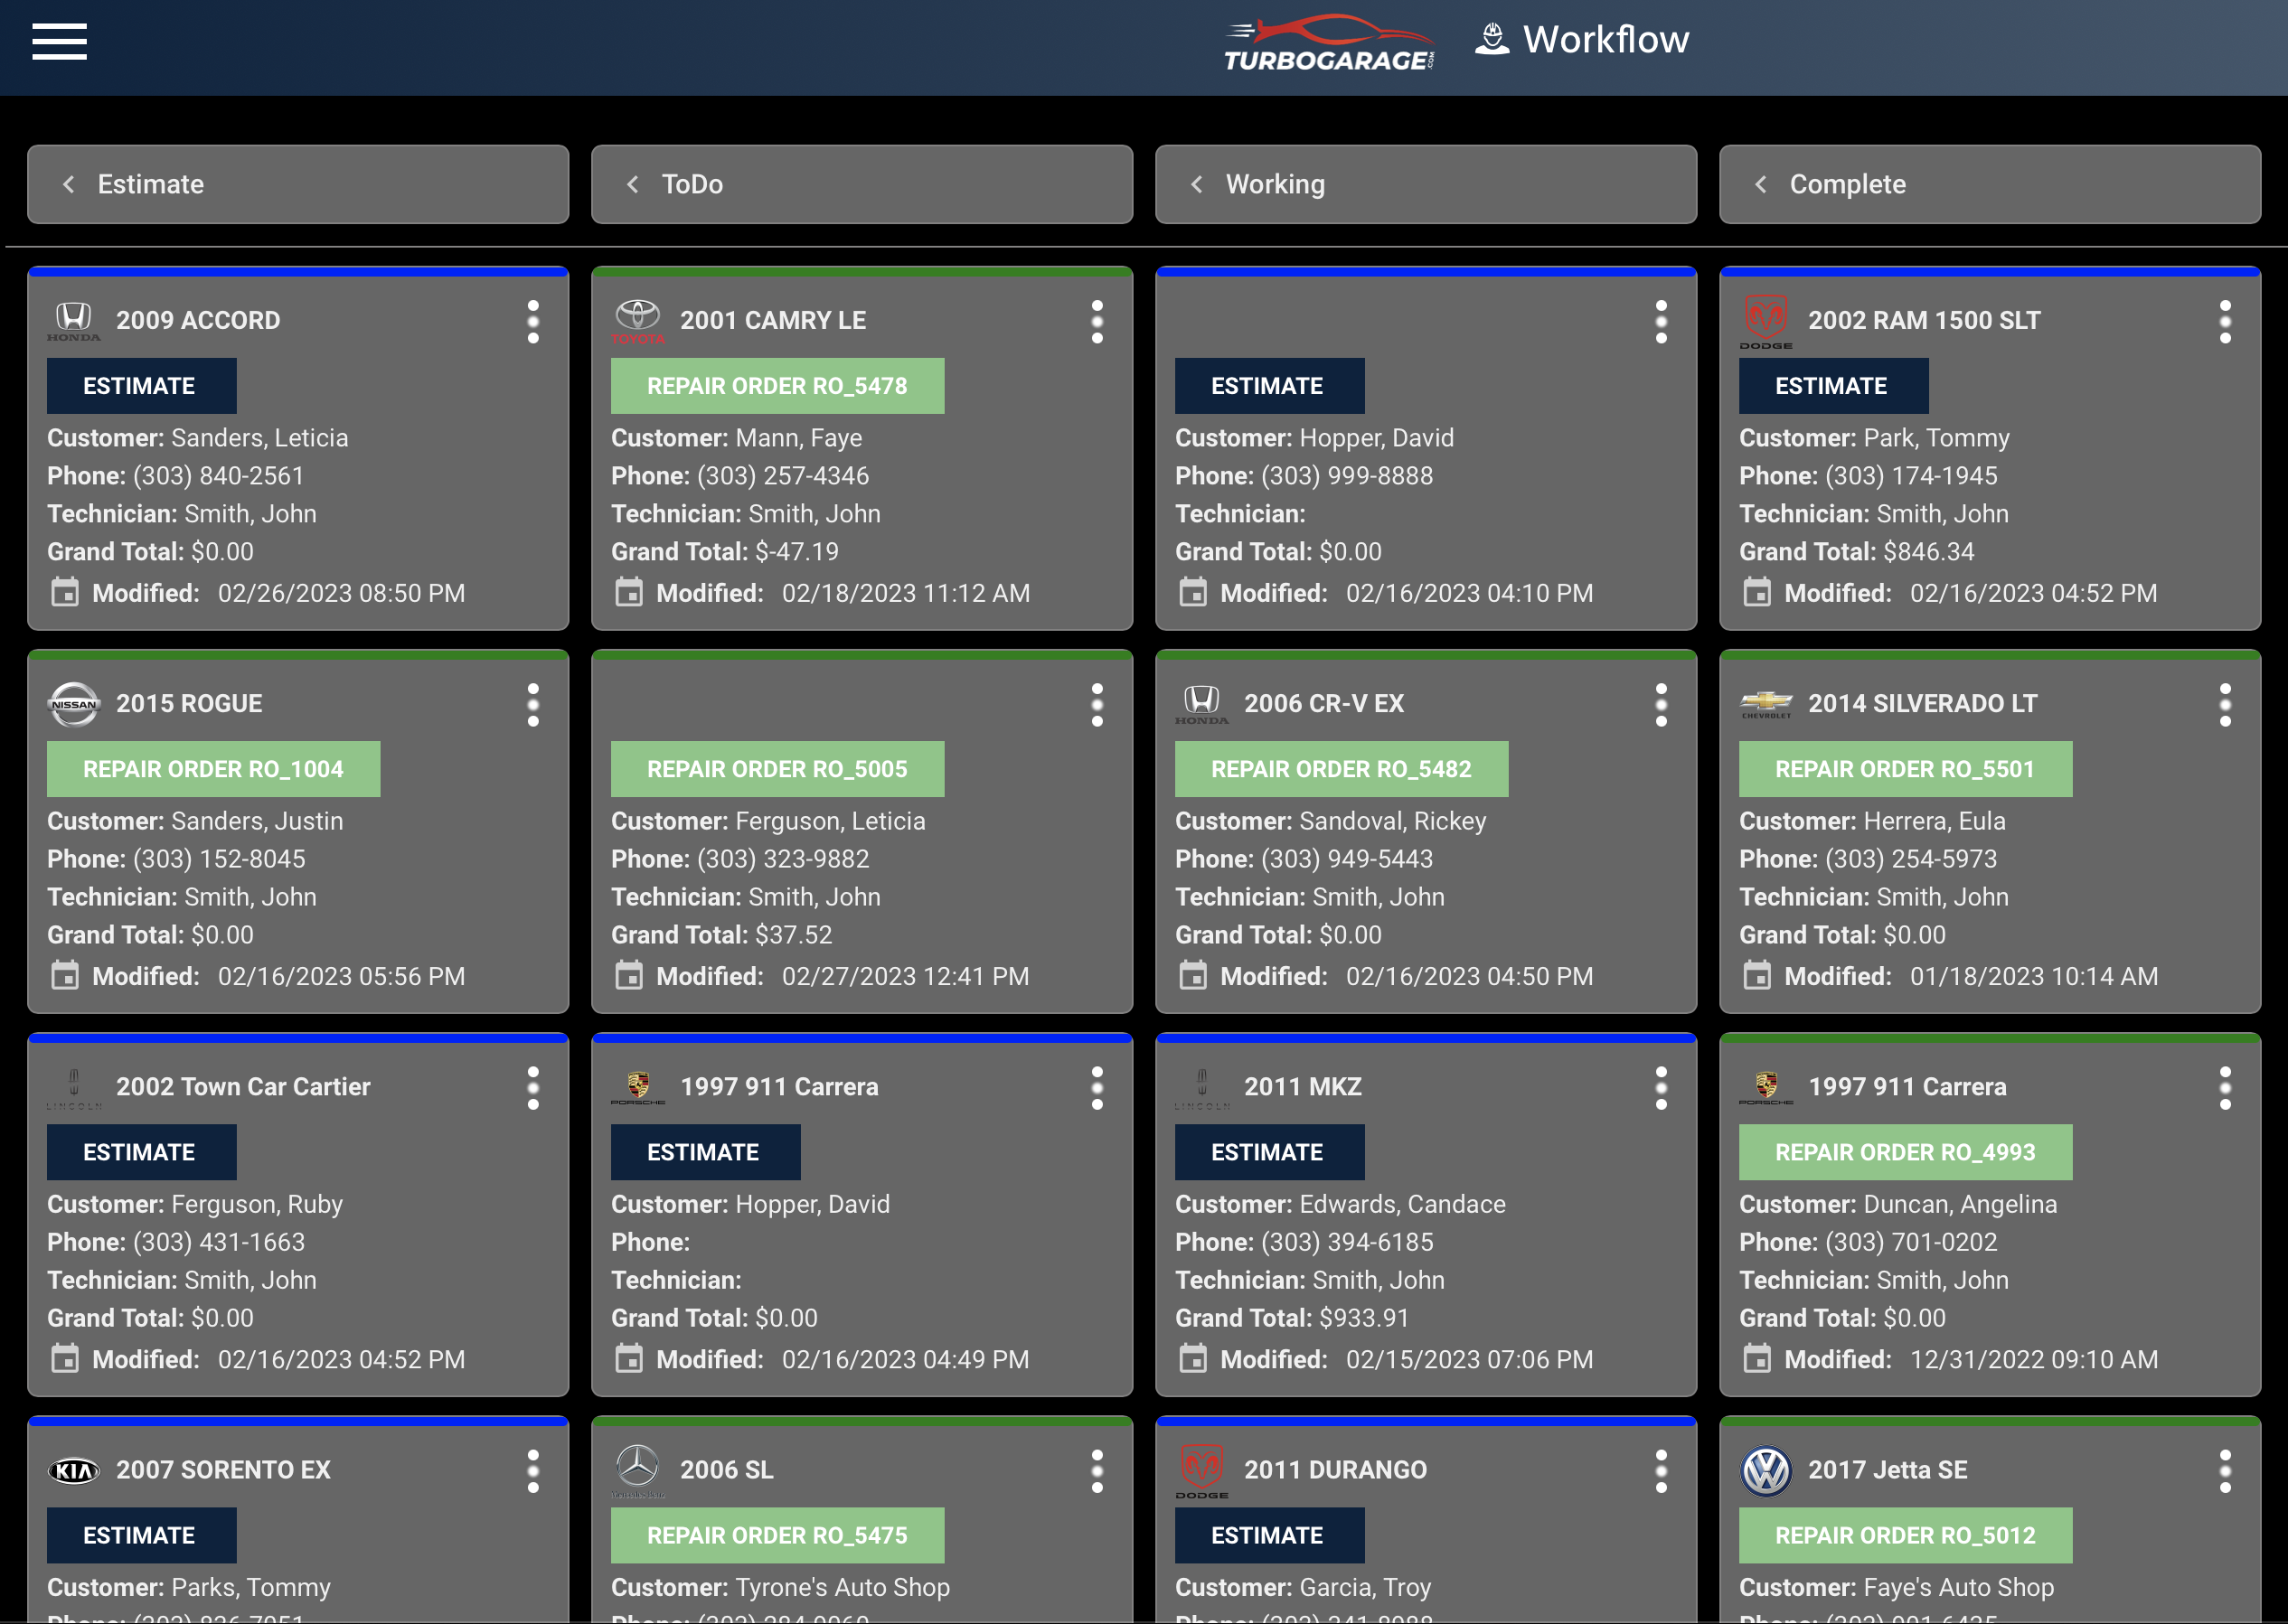 Using TurboGarage’s Auto Repair Workflow Software component, shop owners are able to organize their tickets in a visual fashion using our dynamic Kanban style board